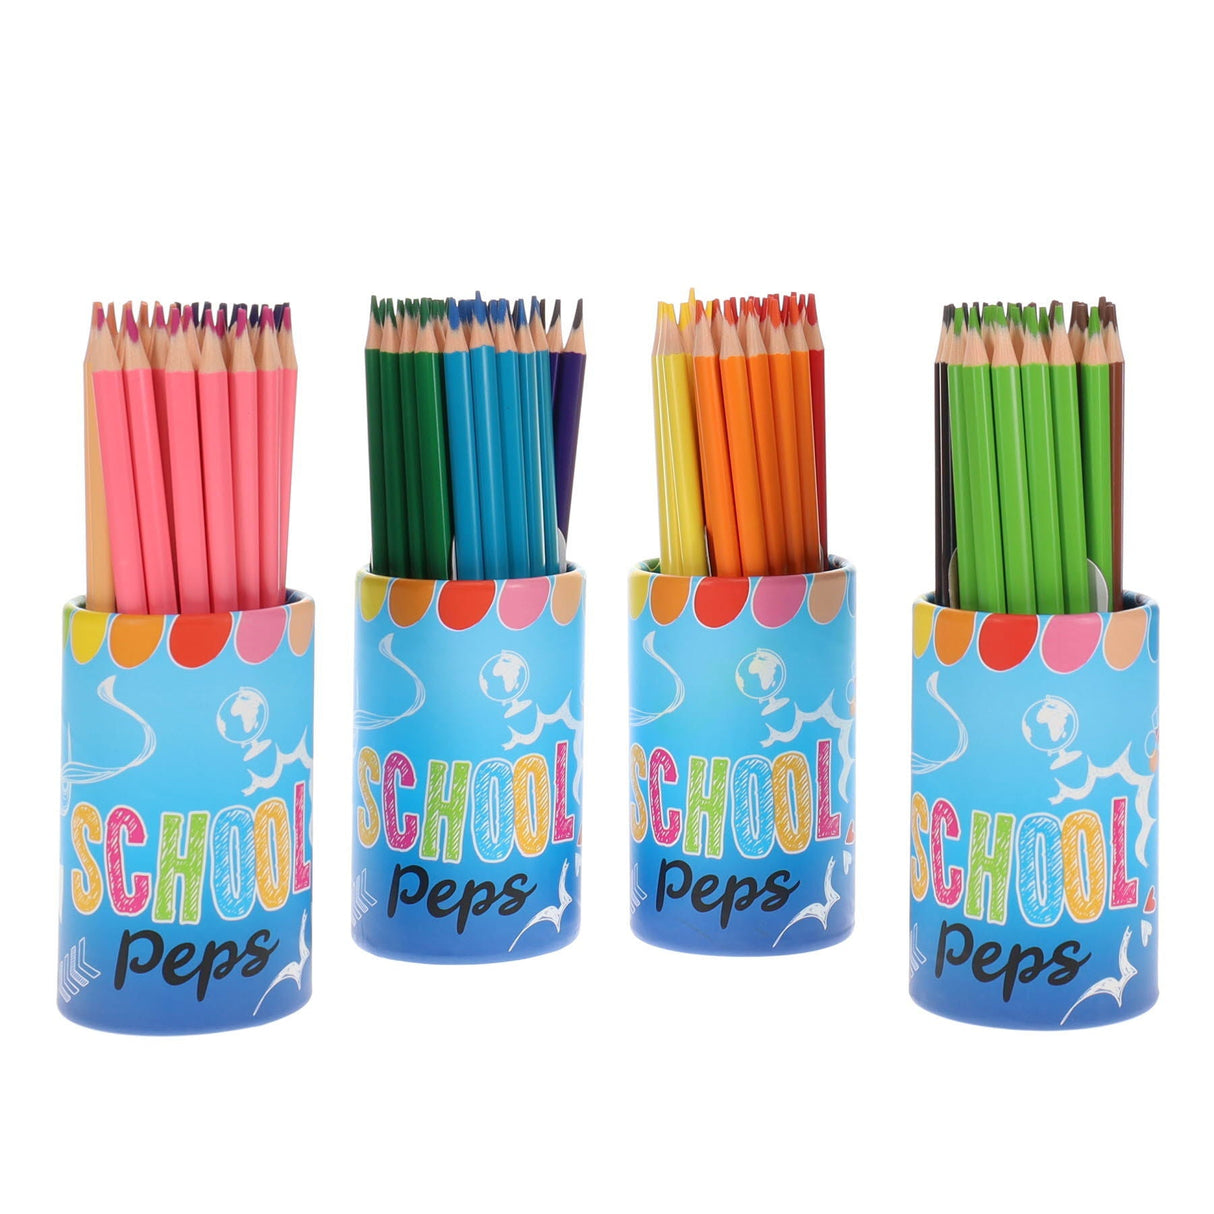 Maped Schoolpack Colouring Pencils School Peps - Pack of 144 | Stationery Shop UK